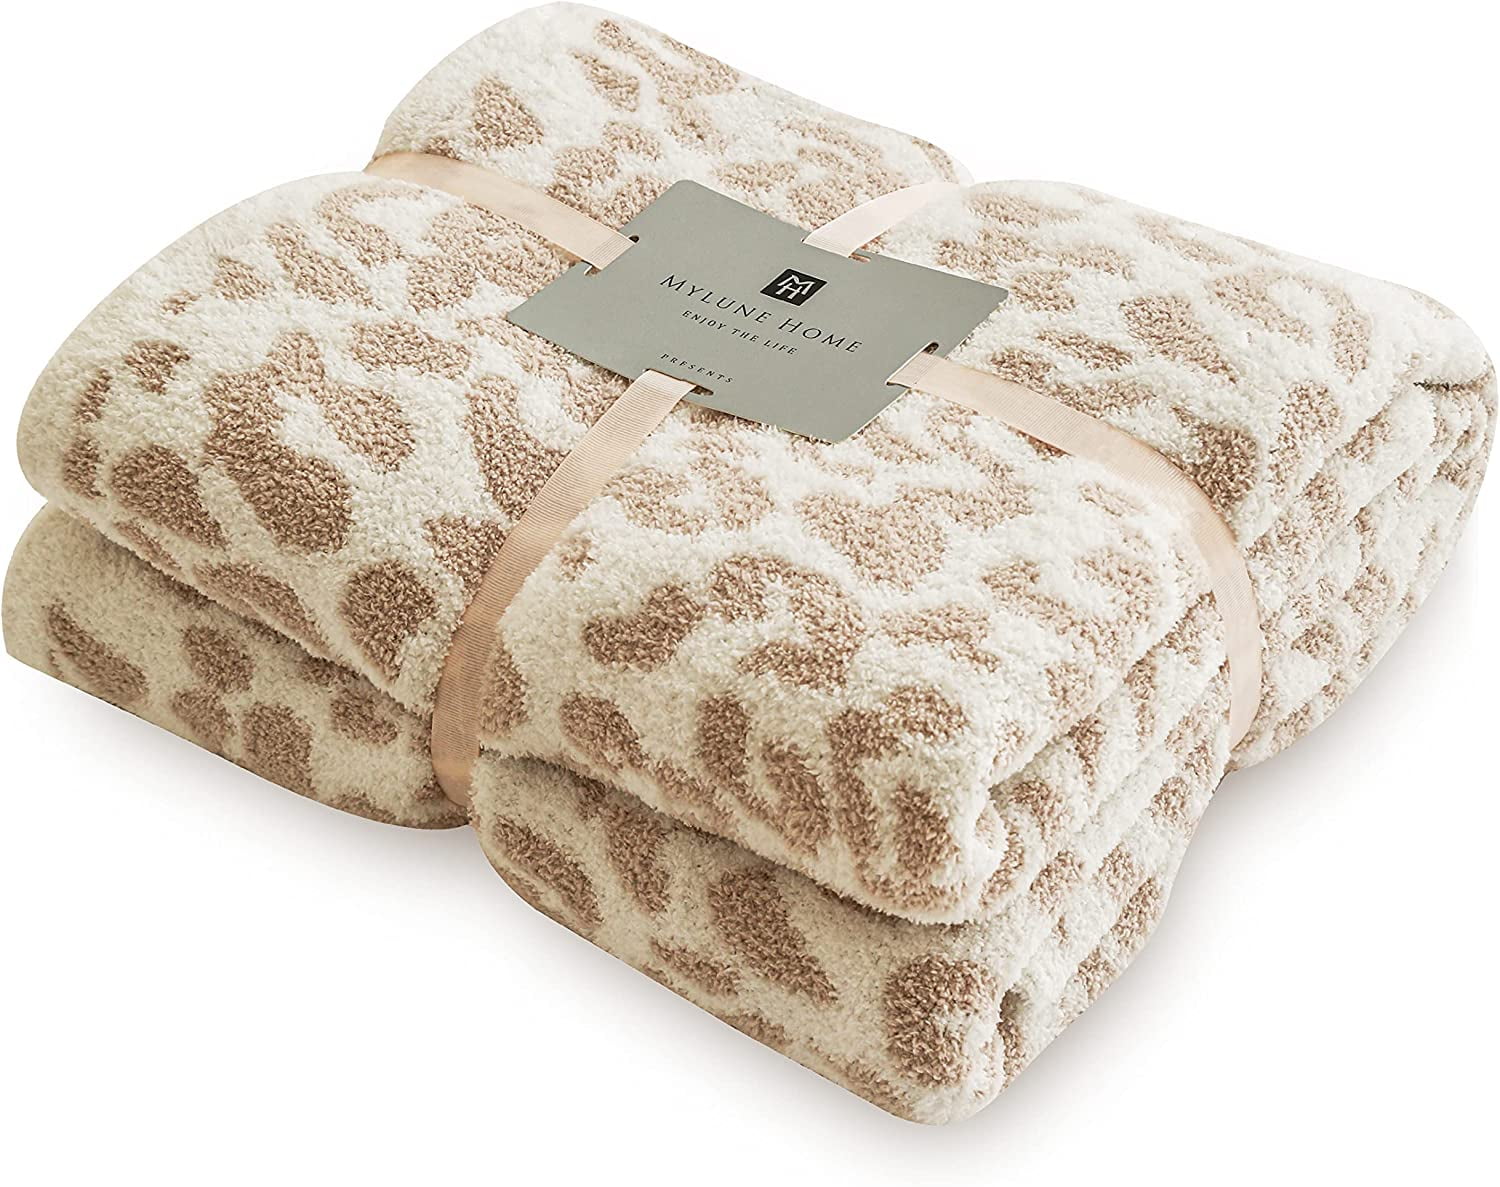 MH MYLUNE HOME Leopard Throw Blanket for Couch Bed Sofa Decorative